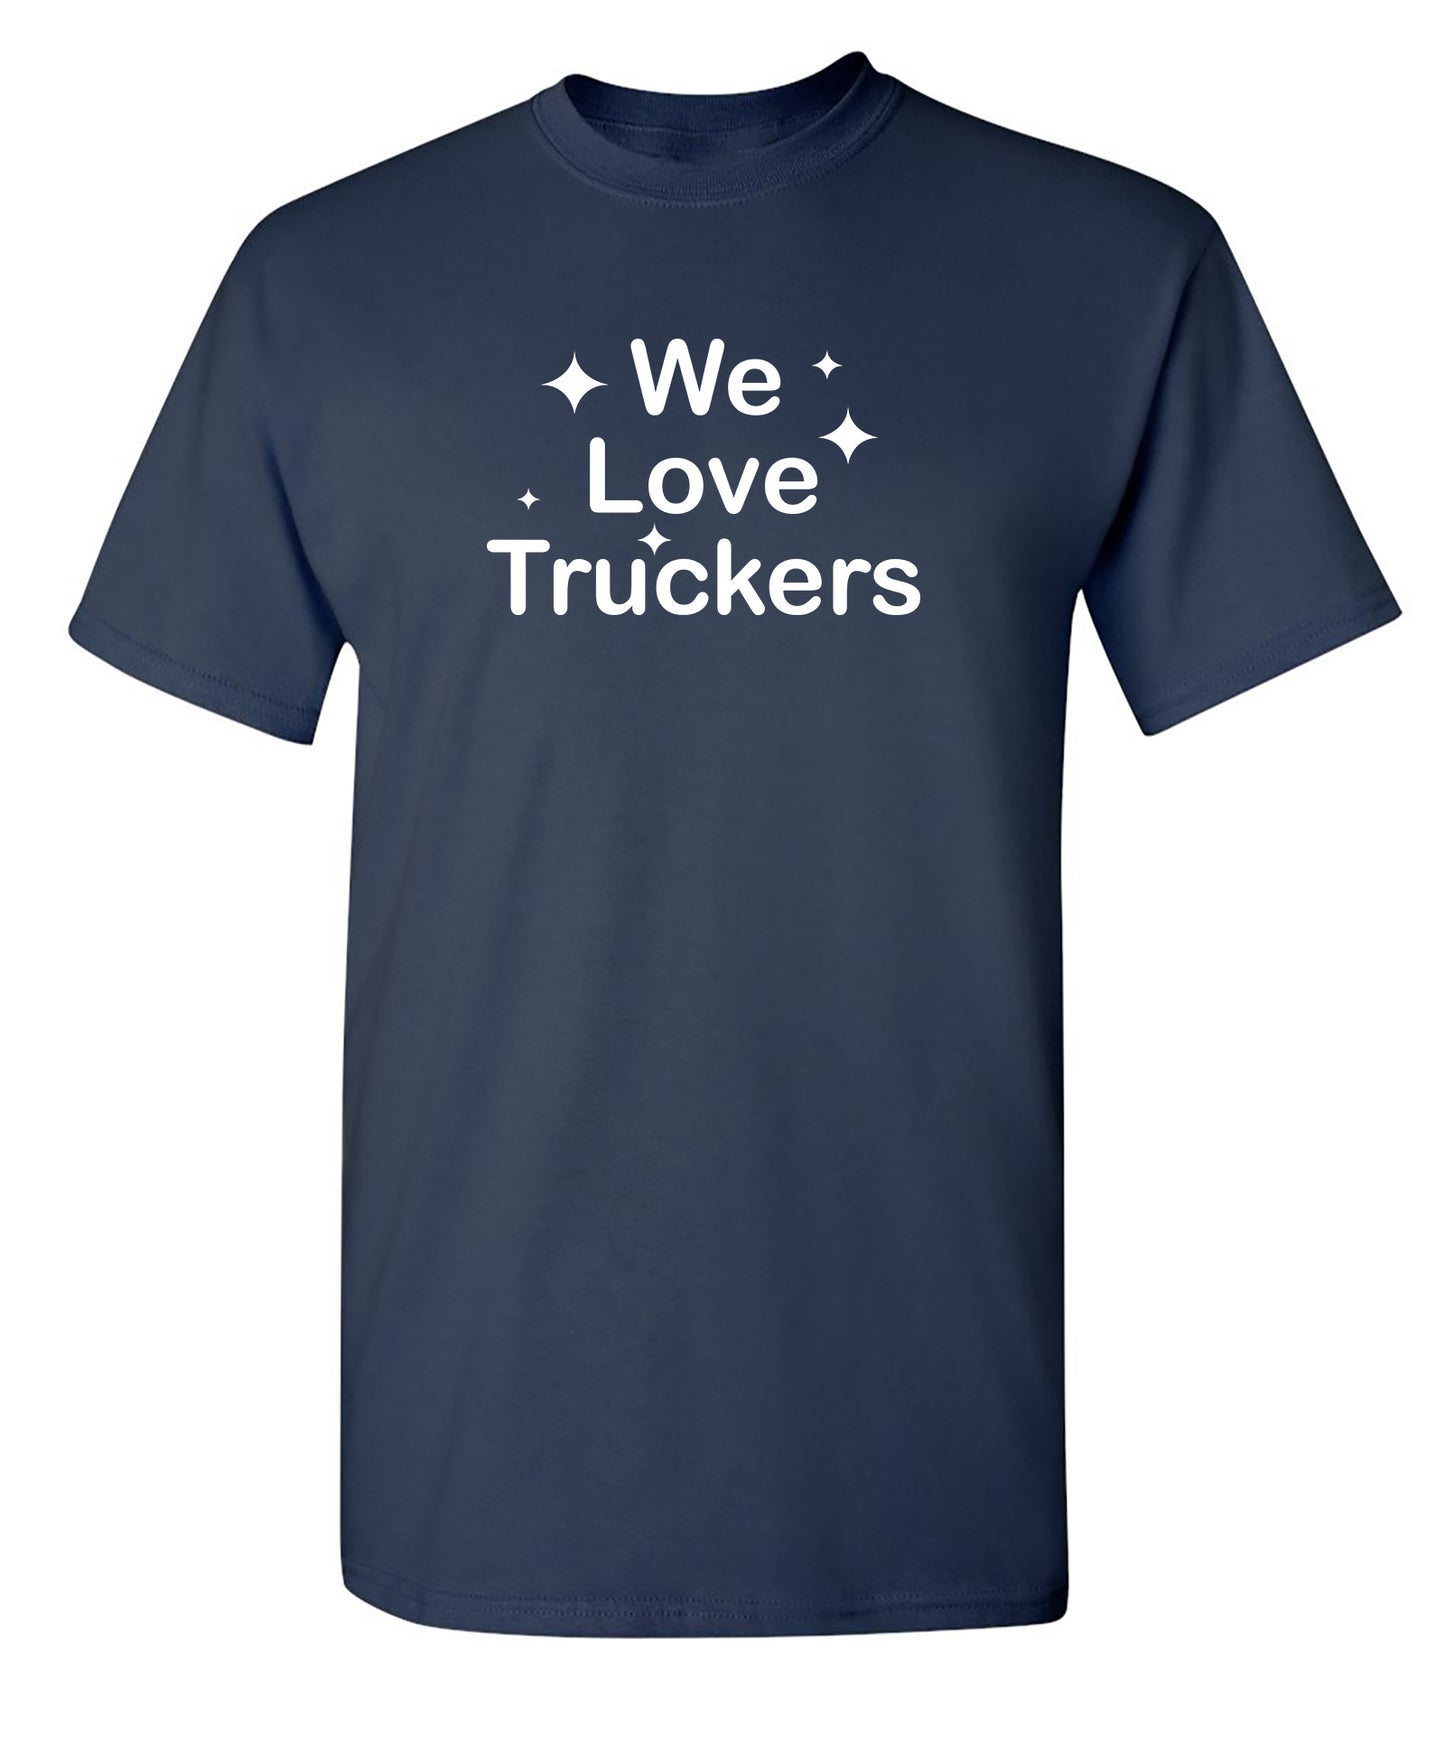 Love Truckers - Funny T Shirts & Graphic Tees